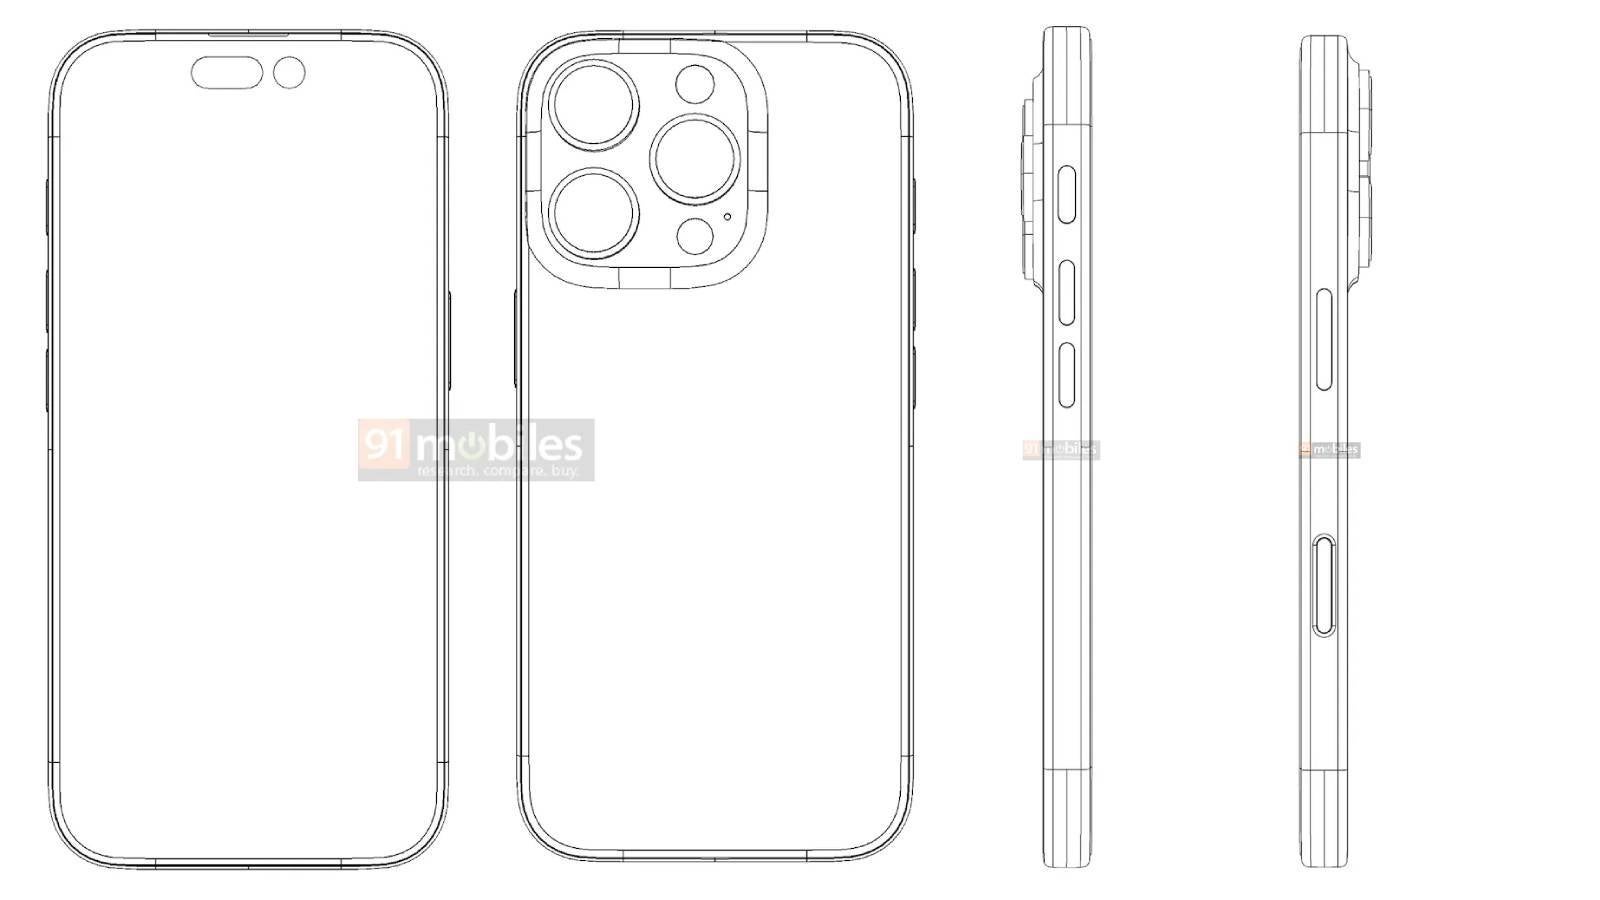 Leaked iPhone 16 Pro CAD renders showcase a new Capture Button - iPhone 16 Pro looks noticeably different than iPhone 15 Pro in leaked design sketches